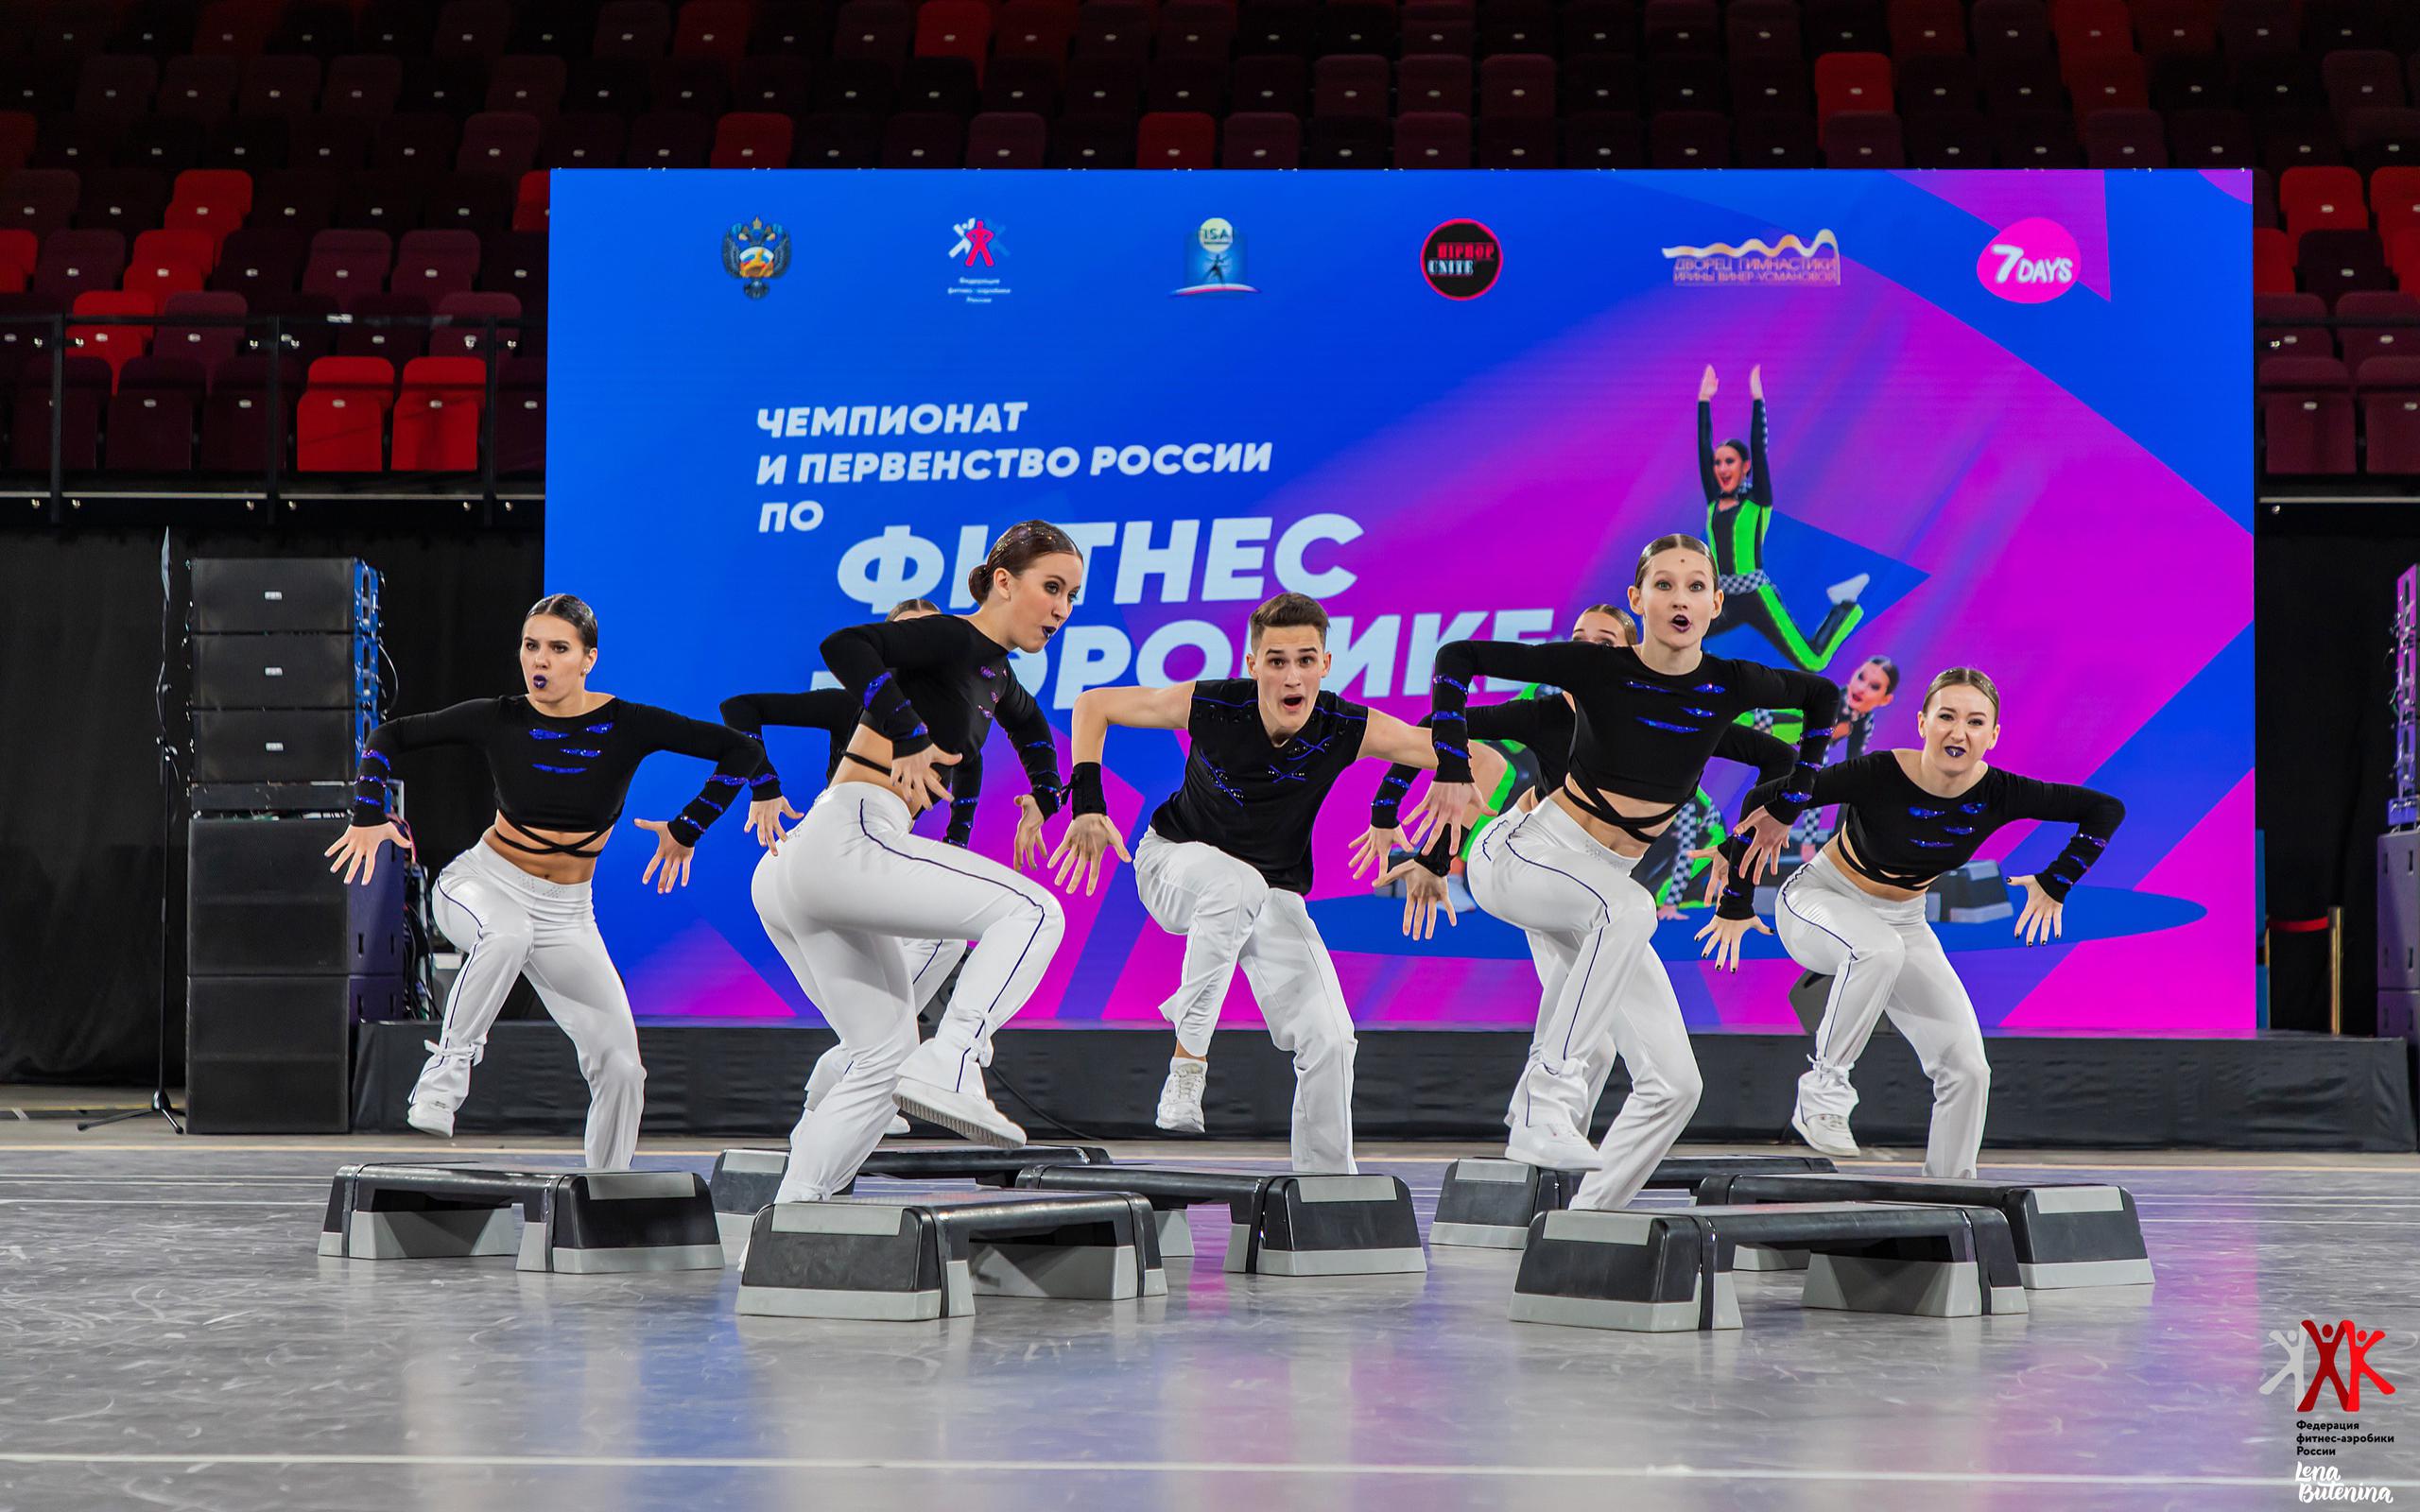 Participants of the Russian championship in fitness aerobics